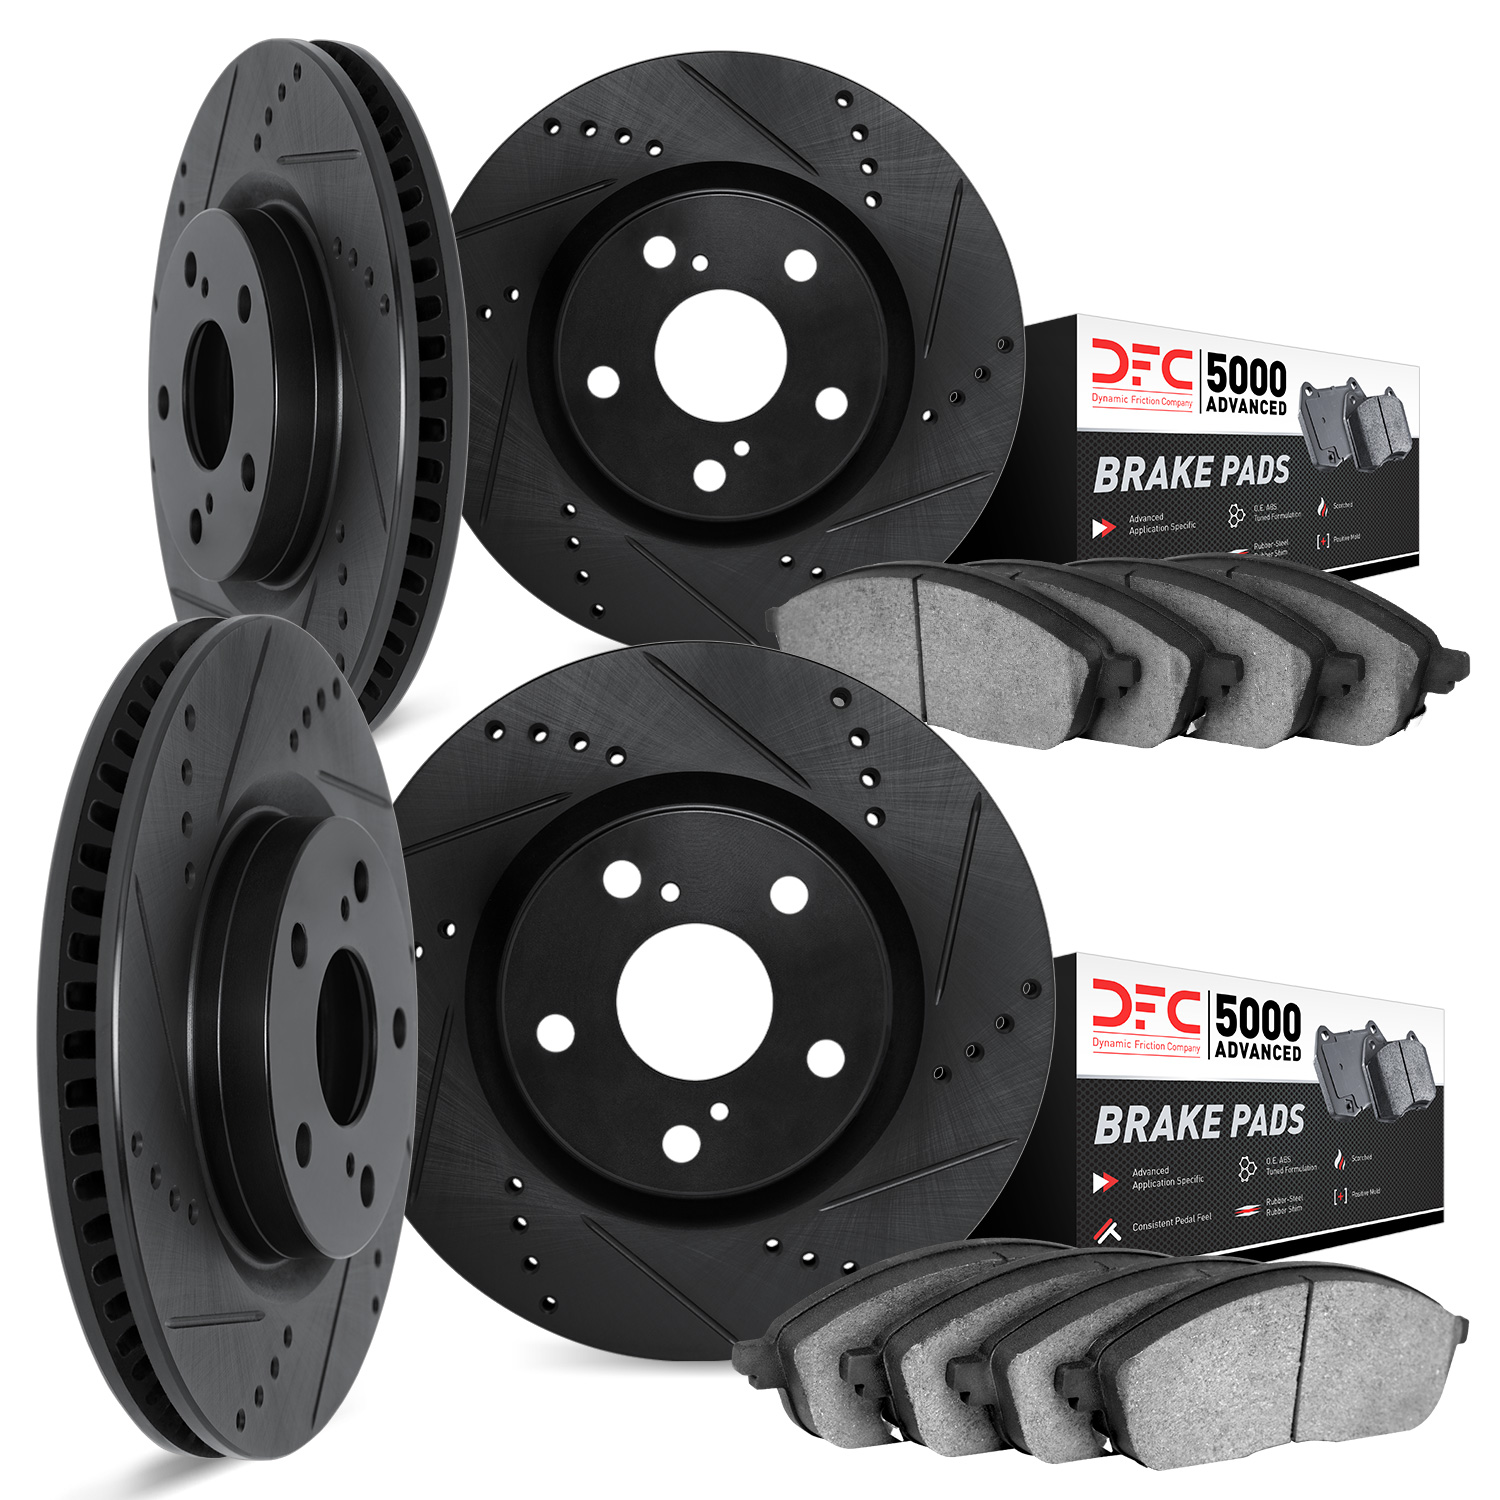 8504-31020 Drilled/Slotted Brake Rotors w/5000 Advanced Brake Pads Kit [Black], 2006-2007 BMW, Position: Front and Rear